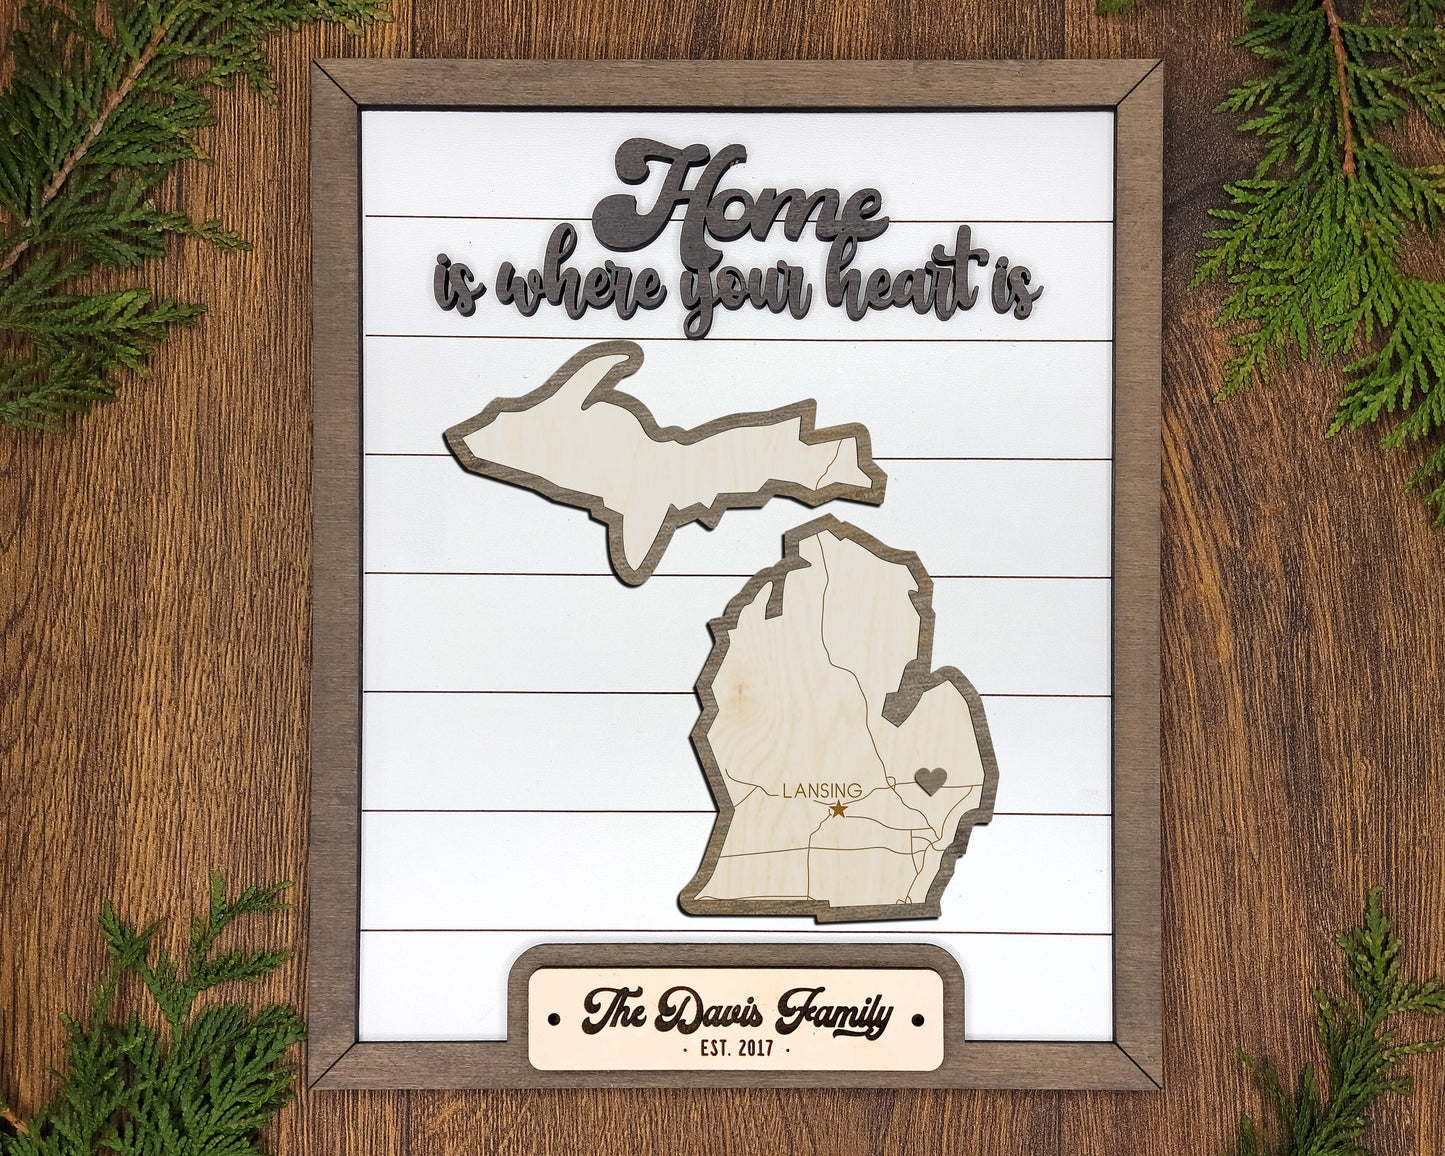 The Michigan State Frame - 13 text options, 12 backgrounds, 25 icons Included - Make over 7,500 designs - Glowforge & Lightburn Tested